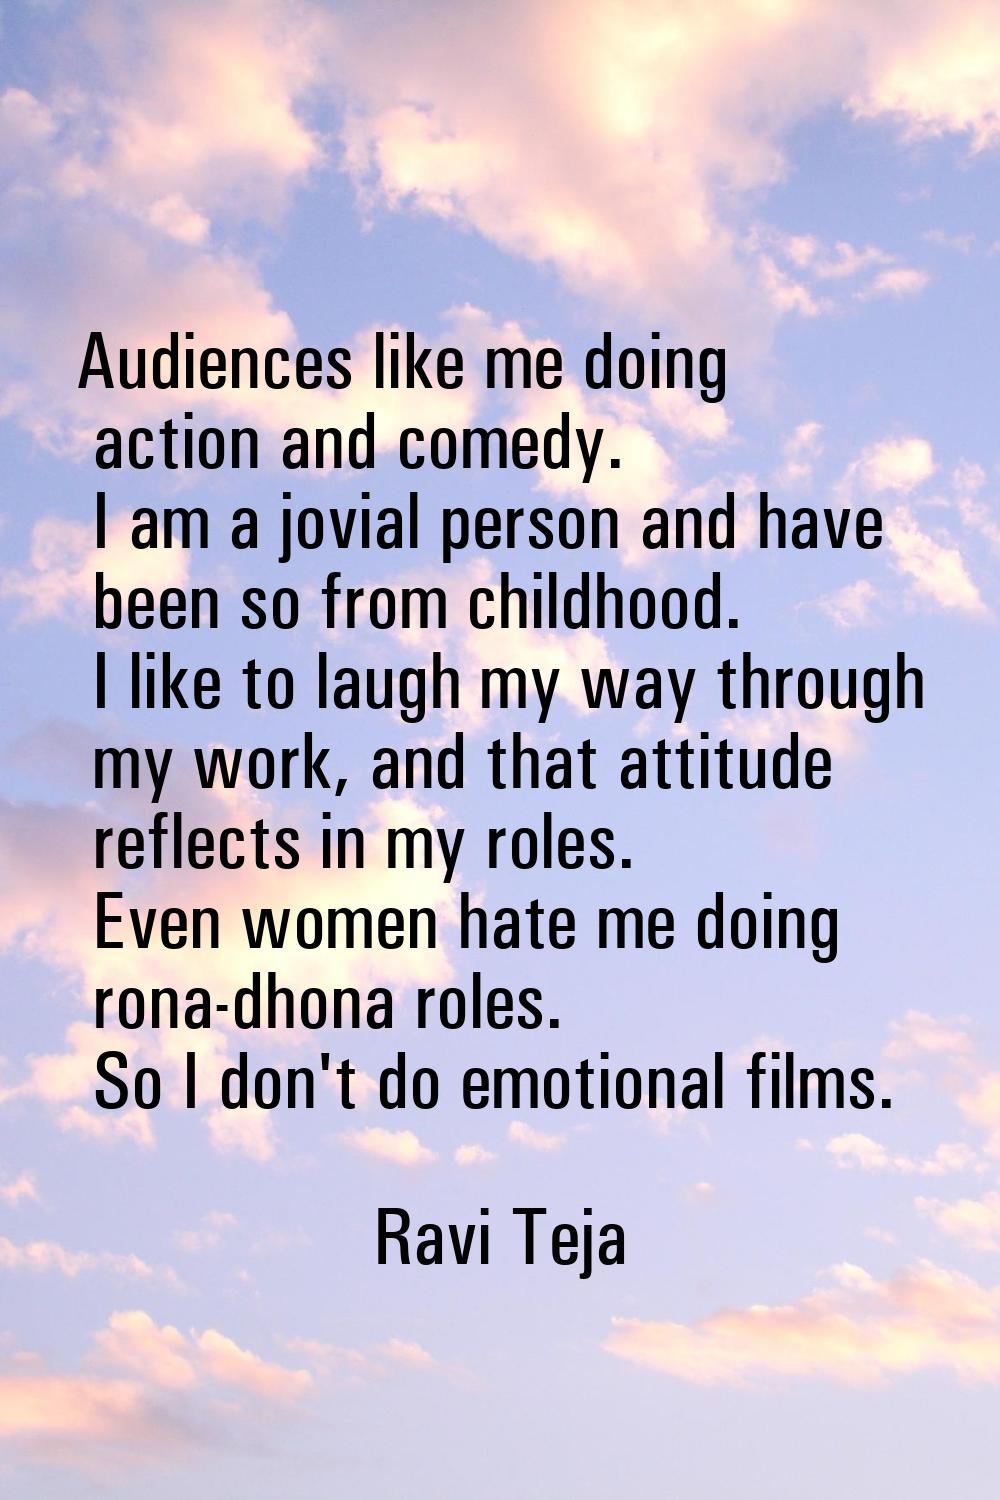 Audiences like me doing action and comedy. I am a jovial person and have been so from childhood. I 